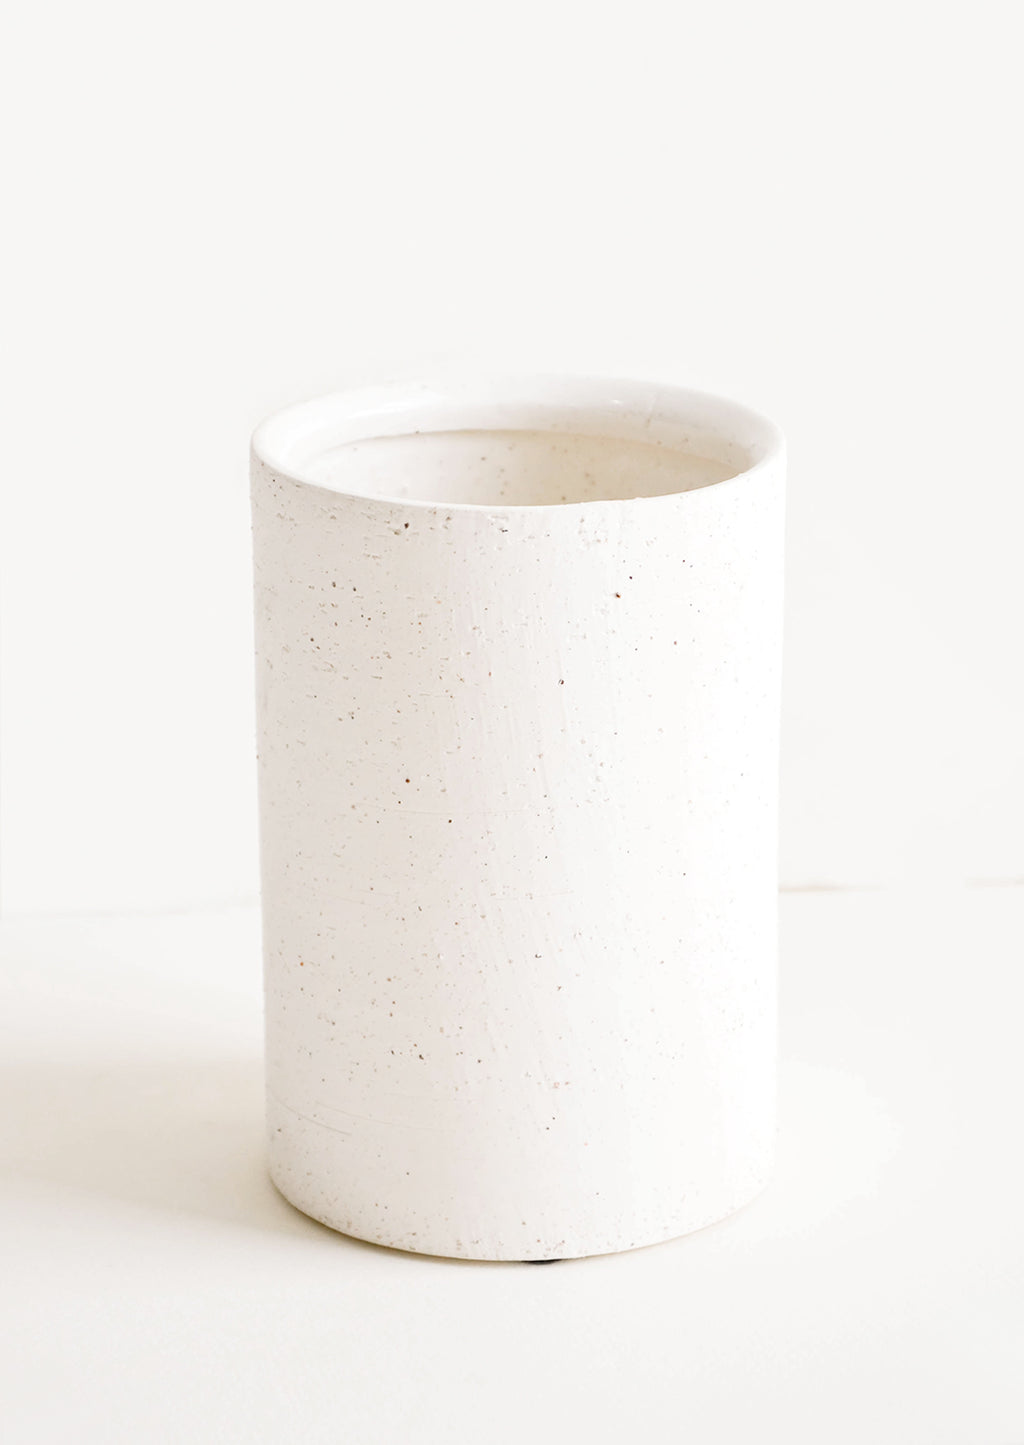 Wide: Vase in short and wide silhouette made from textured, concrete-like material in white